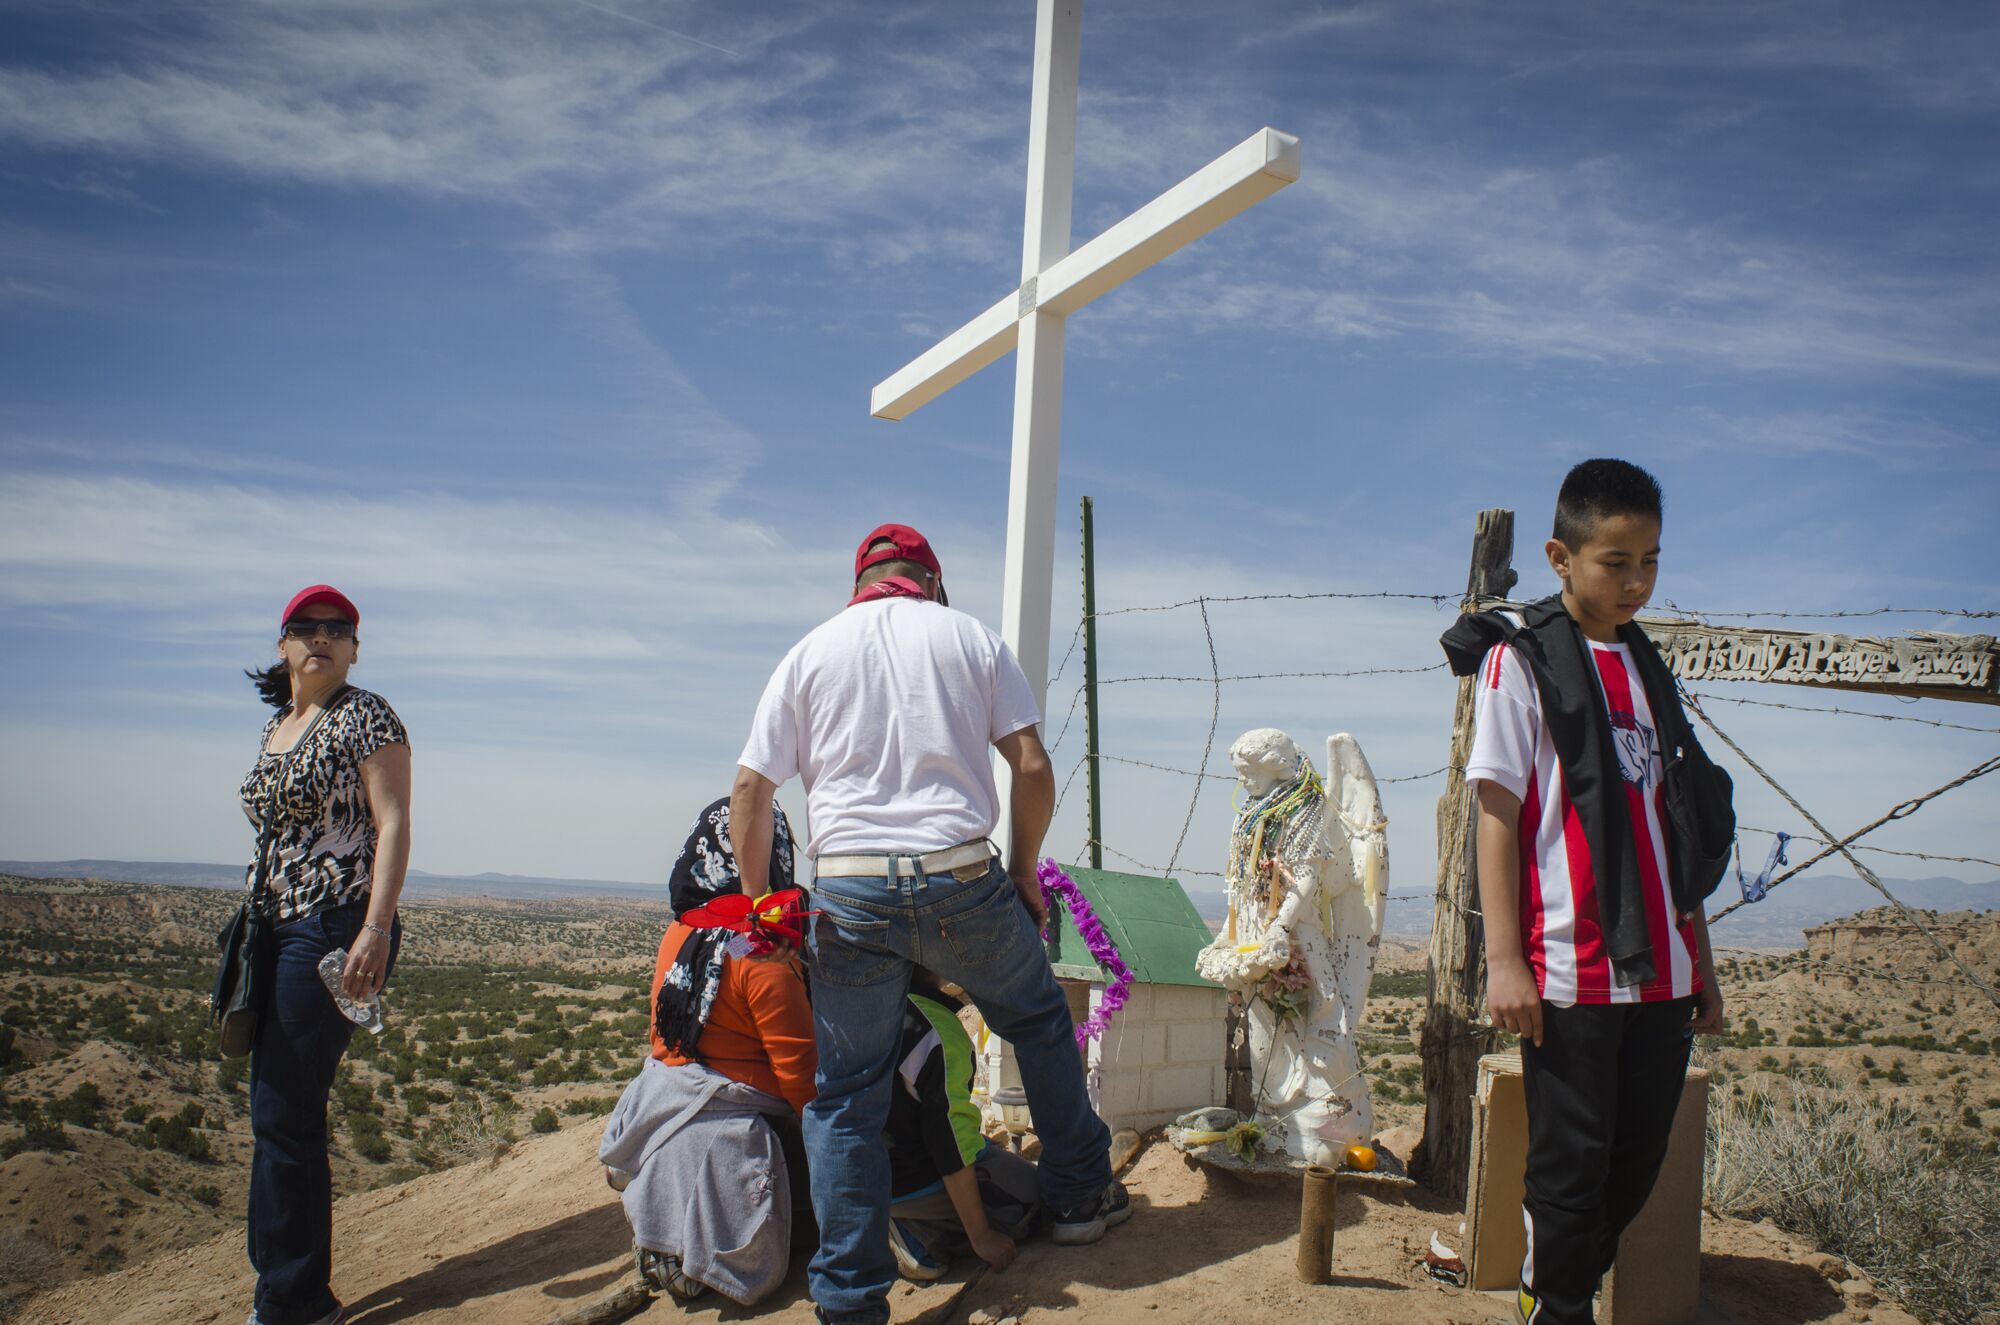 A family from Chihuahua, Mexico prays at a hilltop shrine on the road from Nambé, New Mexico to El Santuario de Chimayo